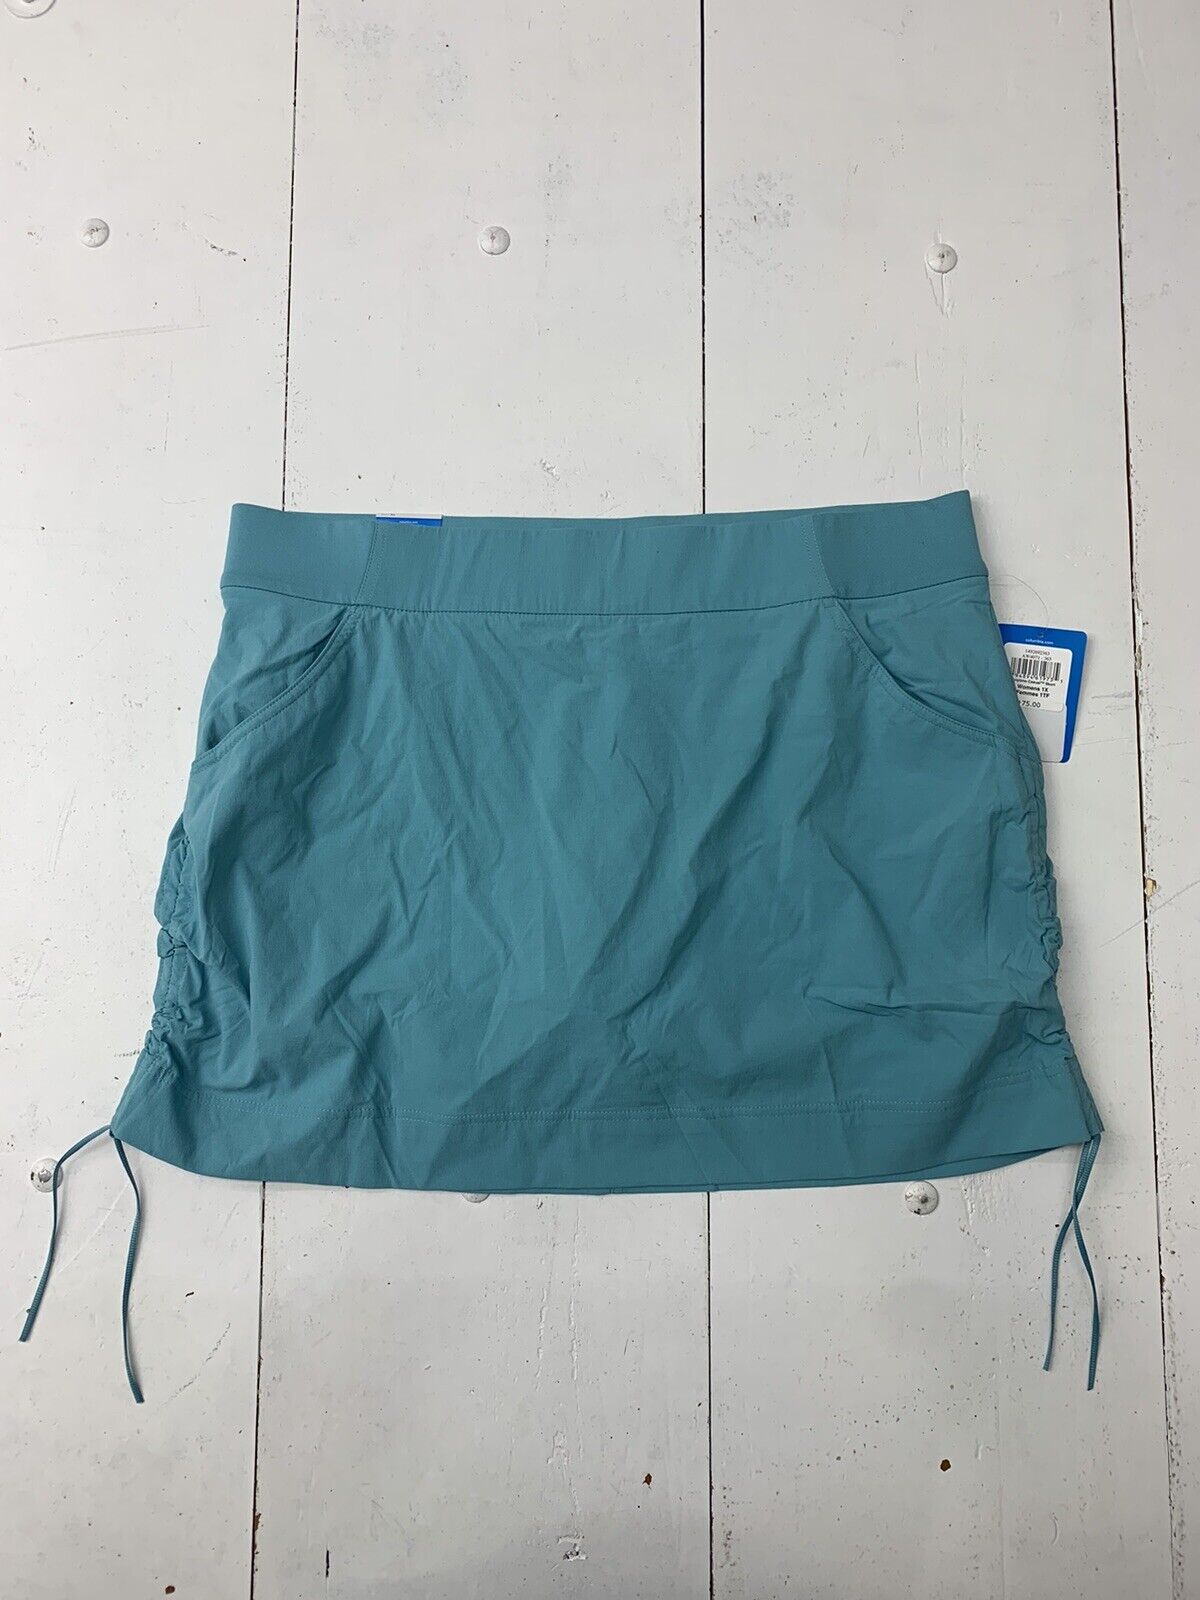 Columbia Anytime Casual￼ Teal Active Fit Jupe-Shorts Skort Women’s Size 1X New